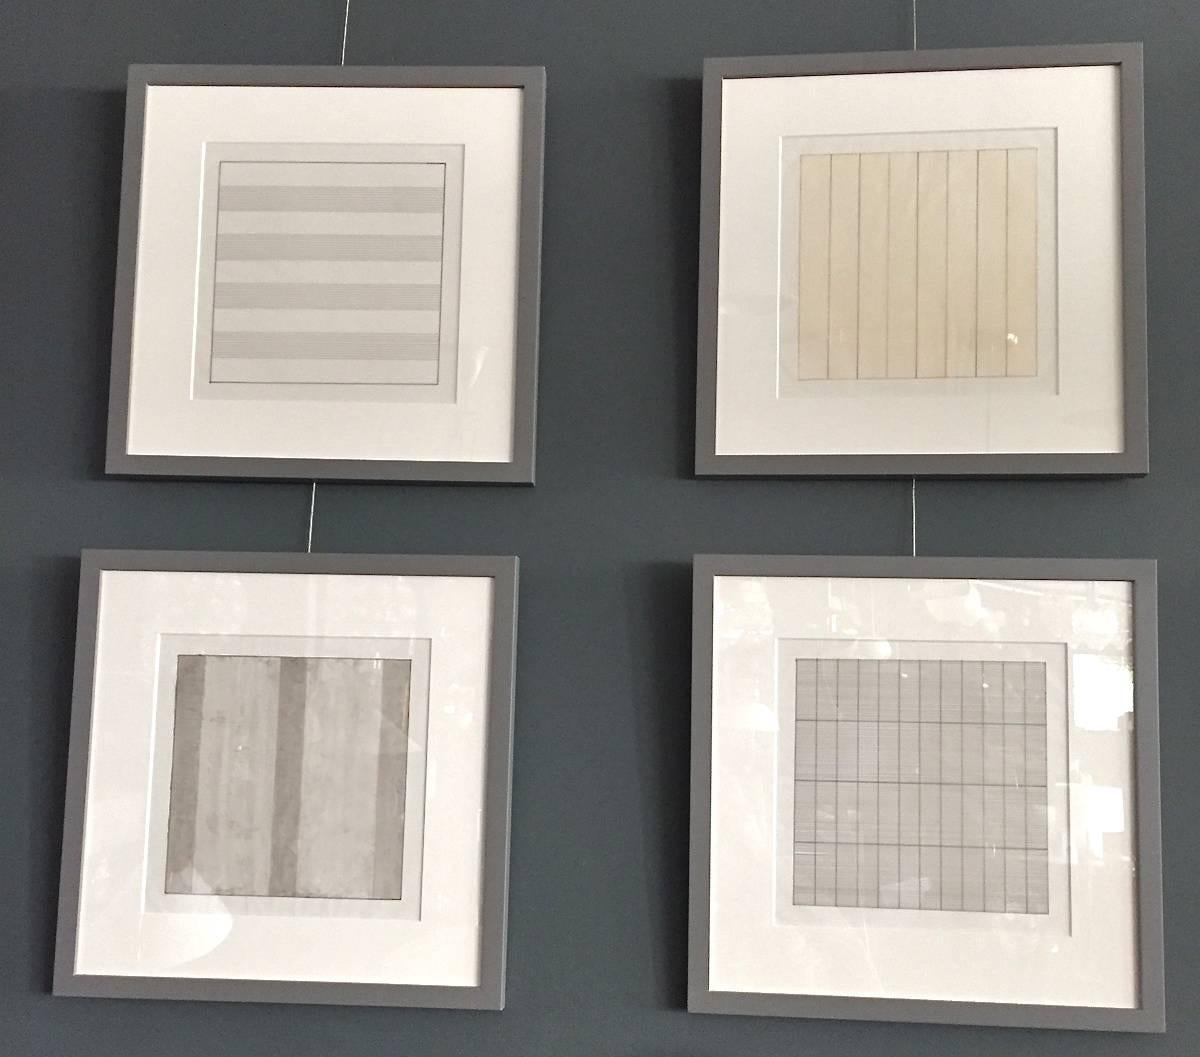 Ten individual offset prints after American/Canadian artist Agnes Martin. 
Prints accompanied 5000 limited edition book Agnes Martin "Paintings and Drawings" issued by the Stedelijk Museum in Amsterdam.
Printed on vellum and newly framed